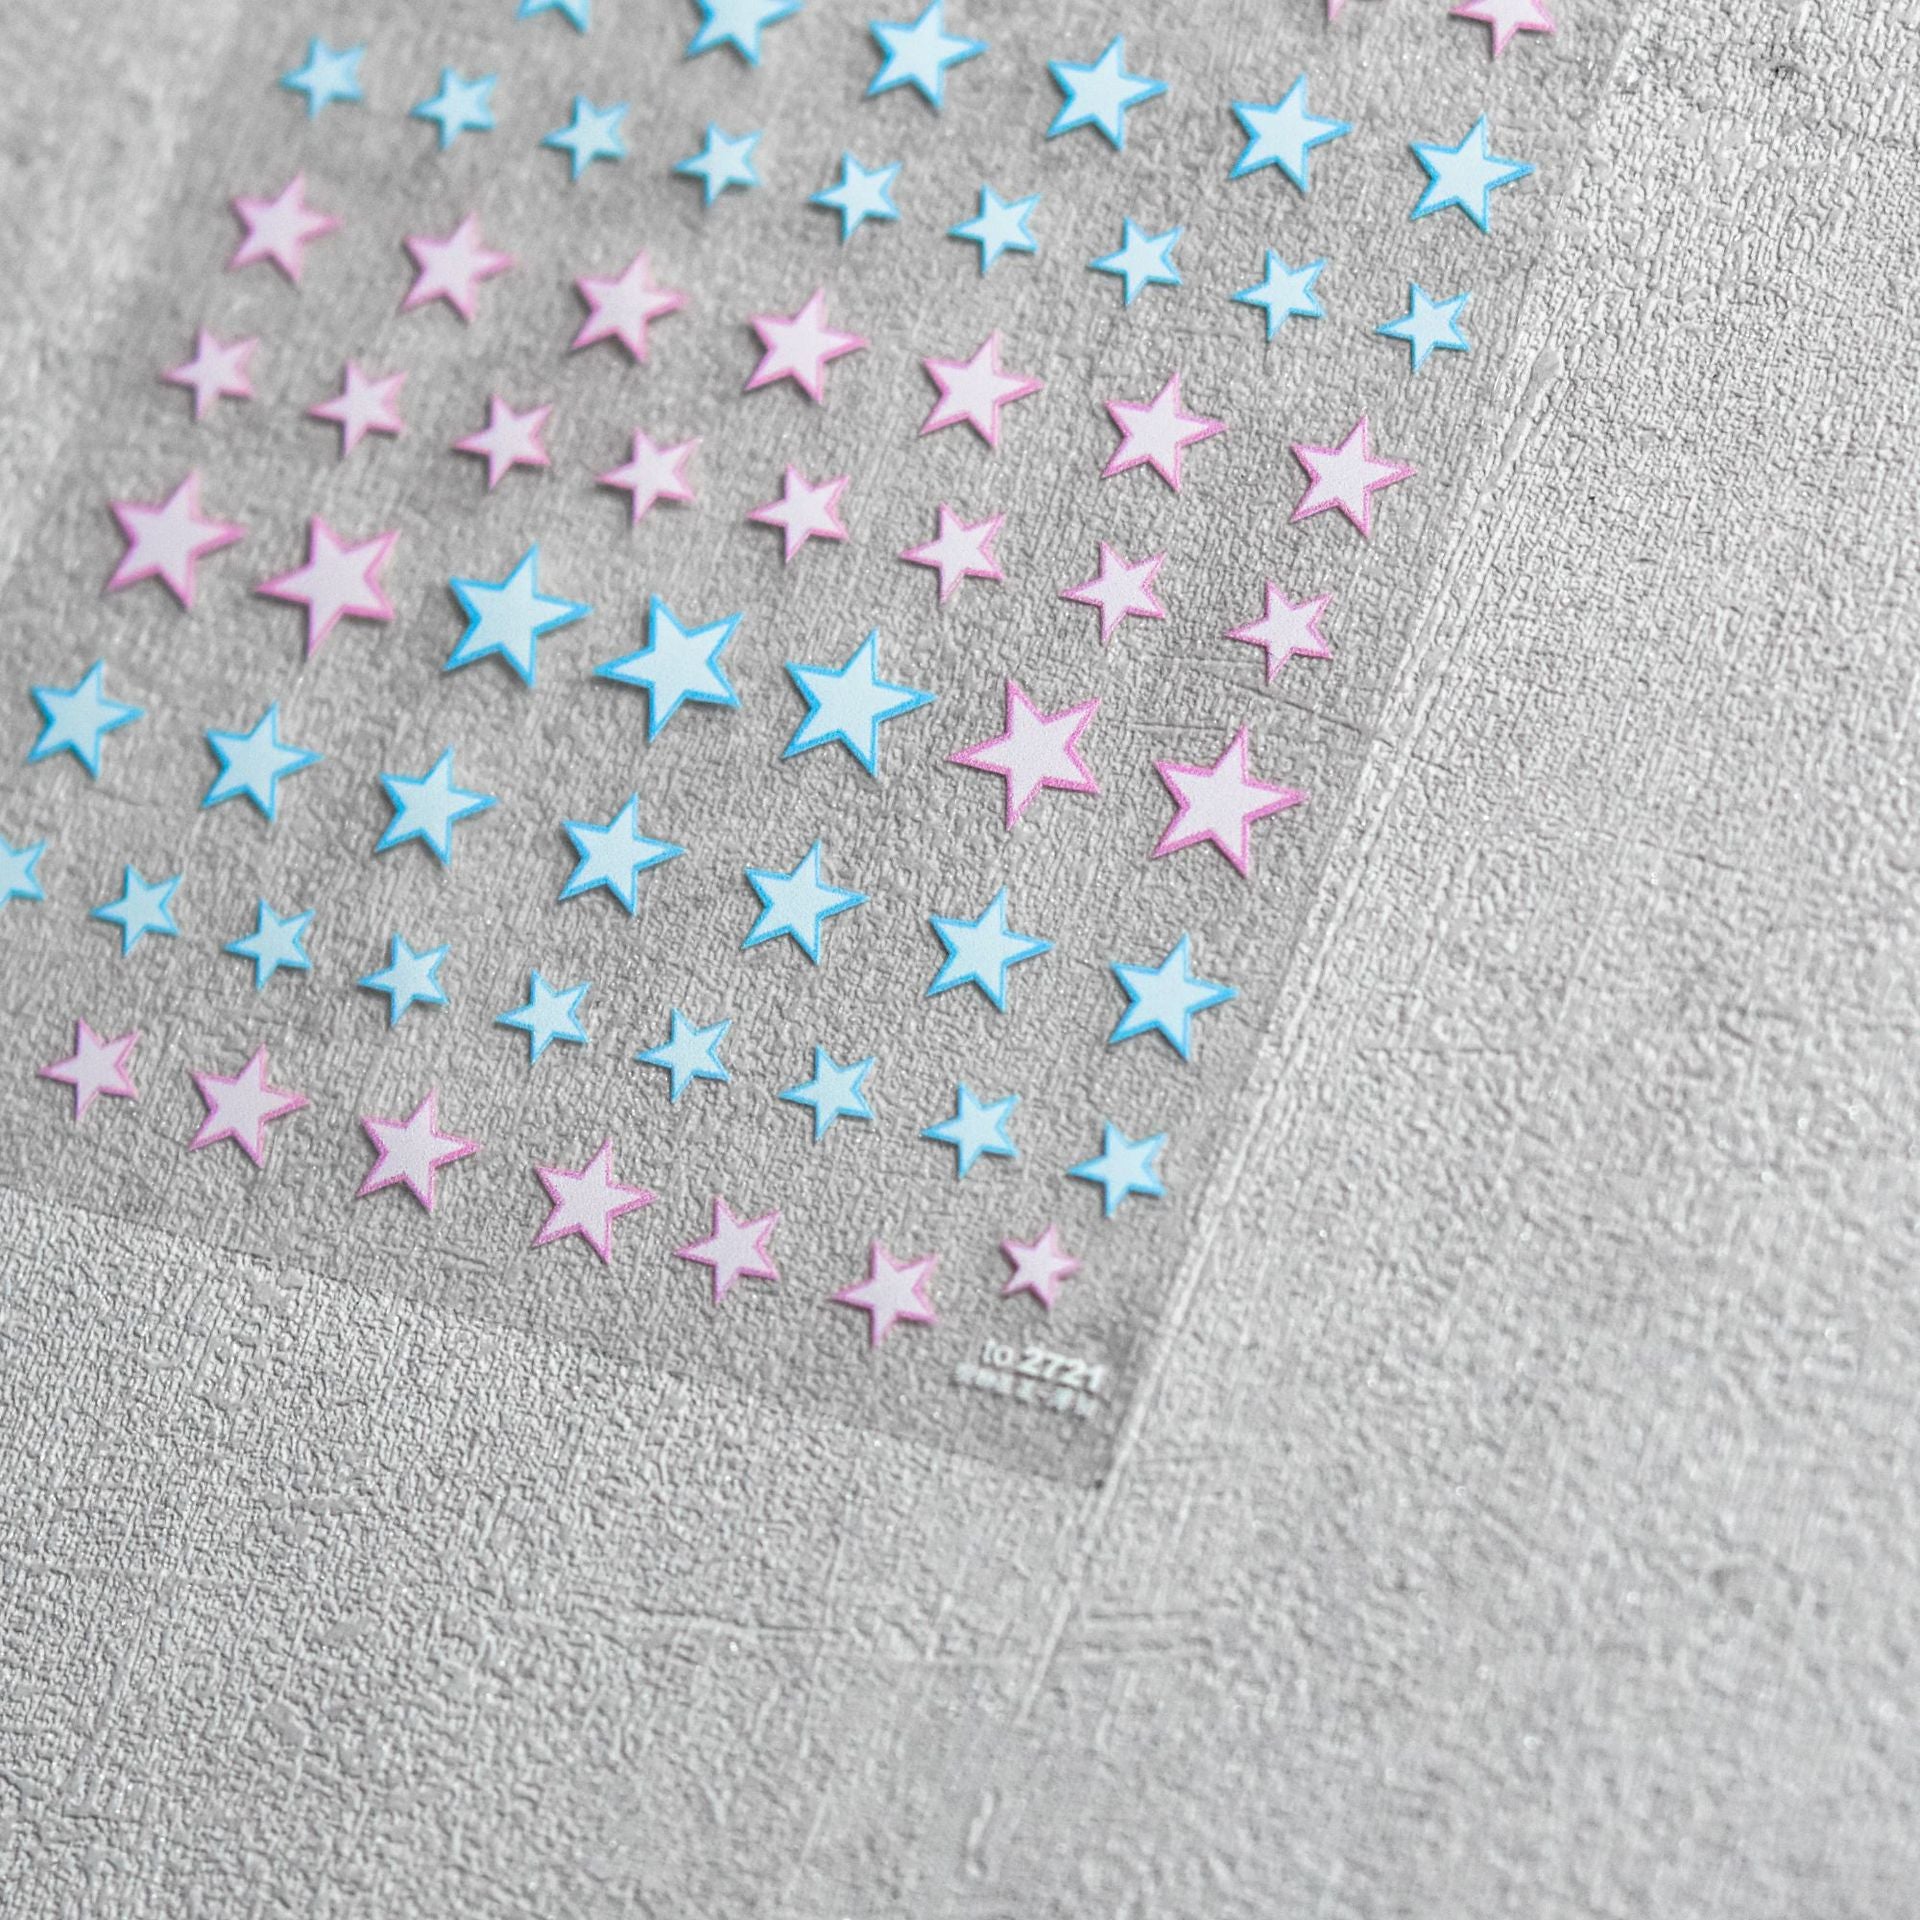 NailMAD Colorful Star Nail Art Stickers Adhesive Sticker Decals Self-Adhesive DIY Manicure Accessories to2720